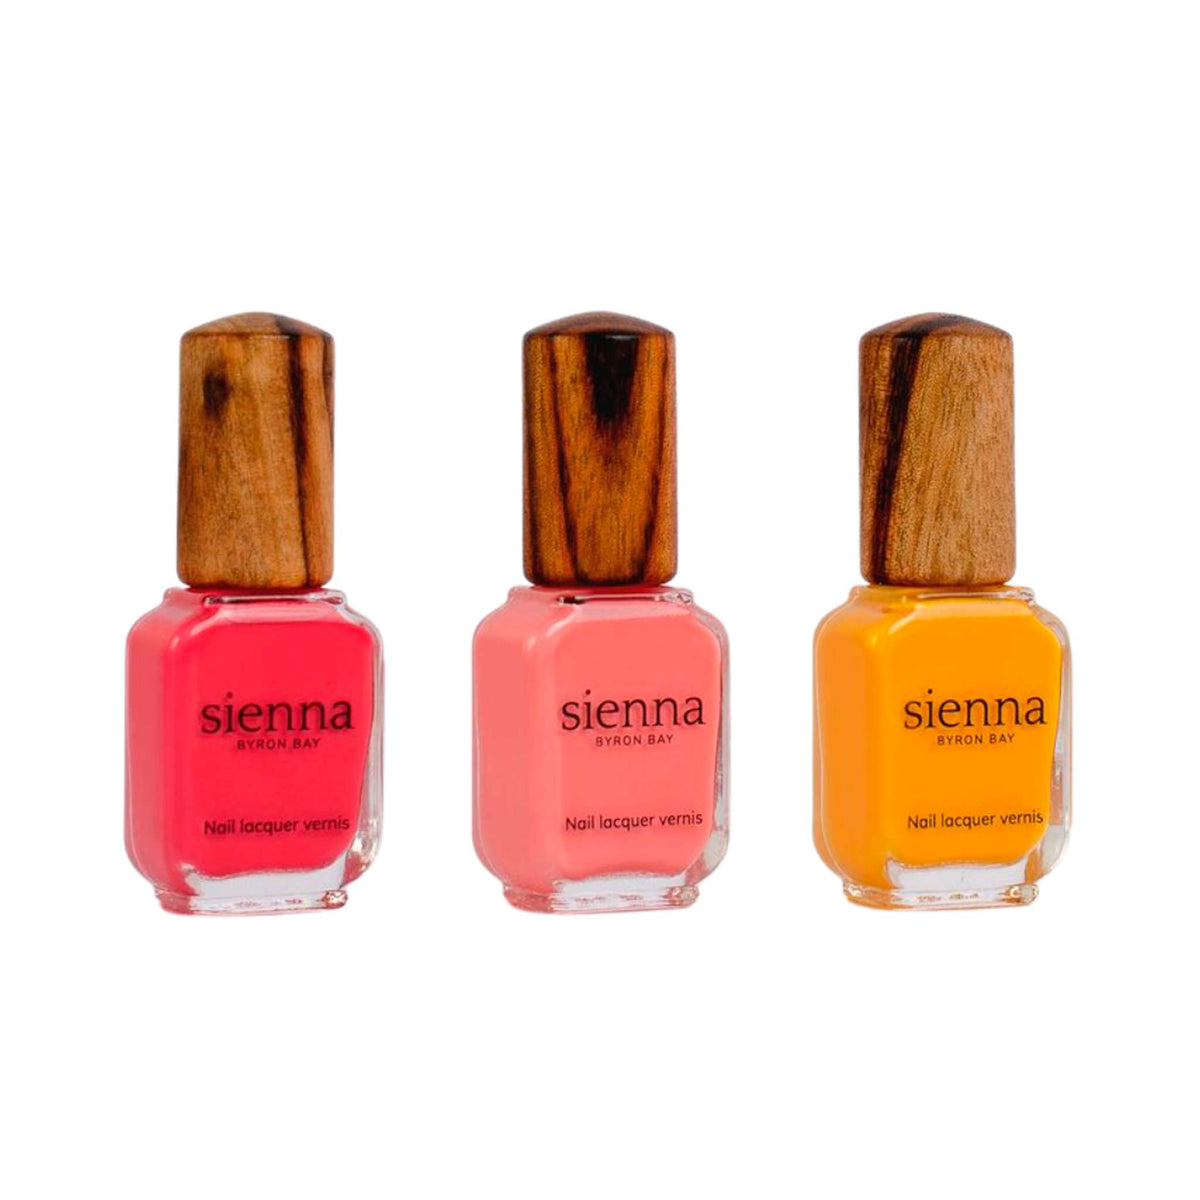 Sorbet trio - Kiss, Sweetheart & Sunflower Nail Lacquer Vernis